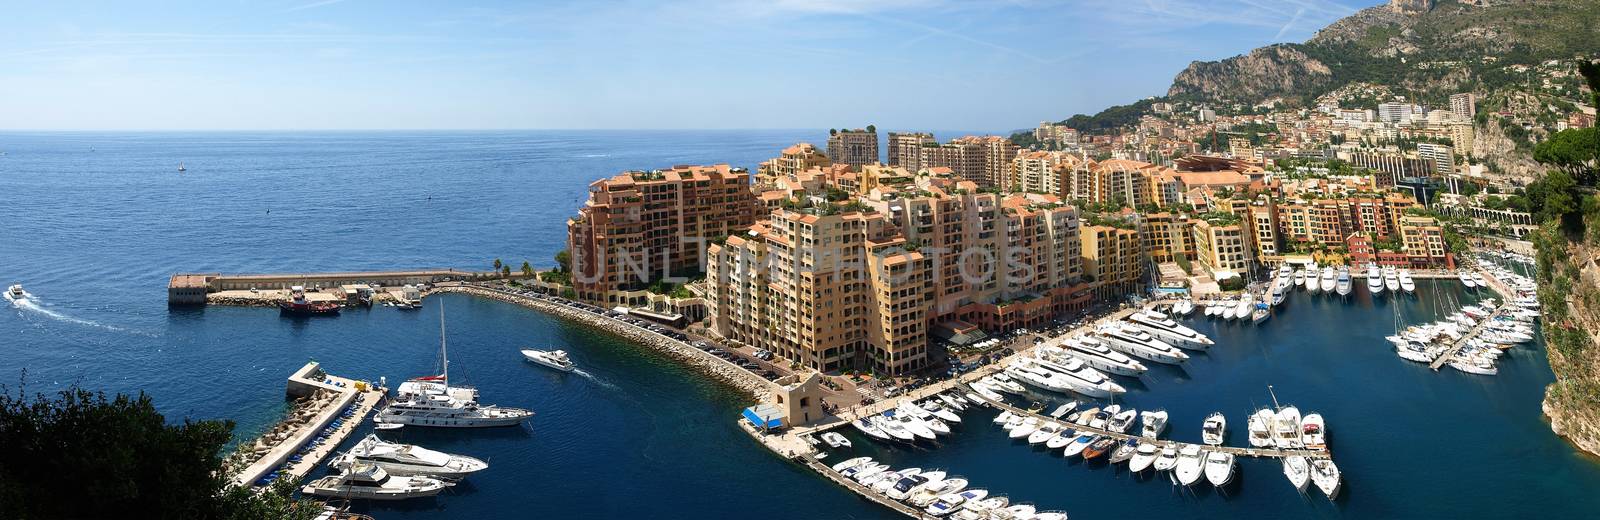 Panorama of Monte Carlo Marina from Above. Fontvieille, new district of Monaco.